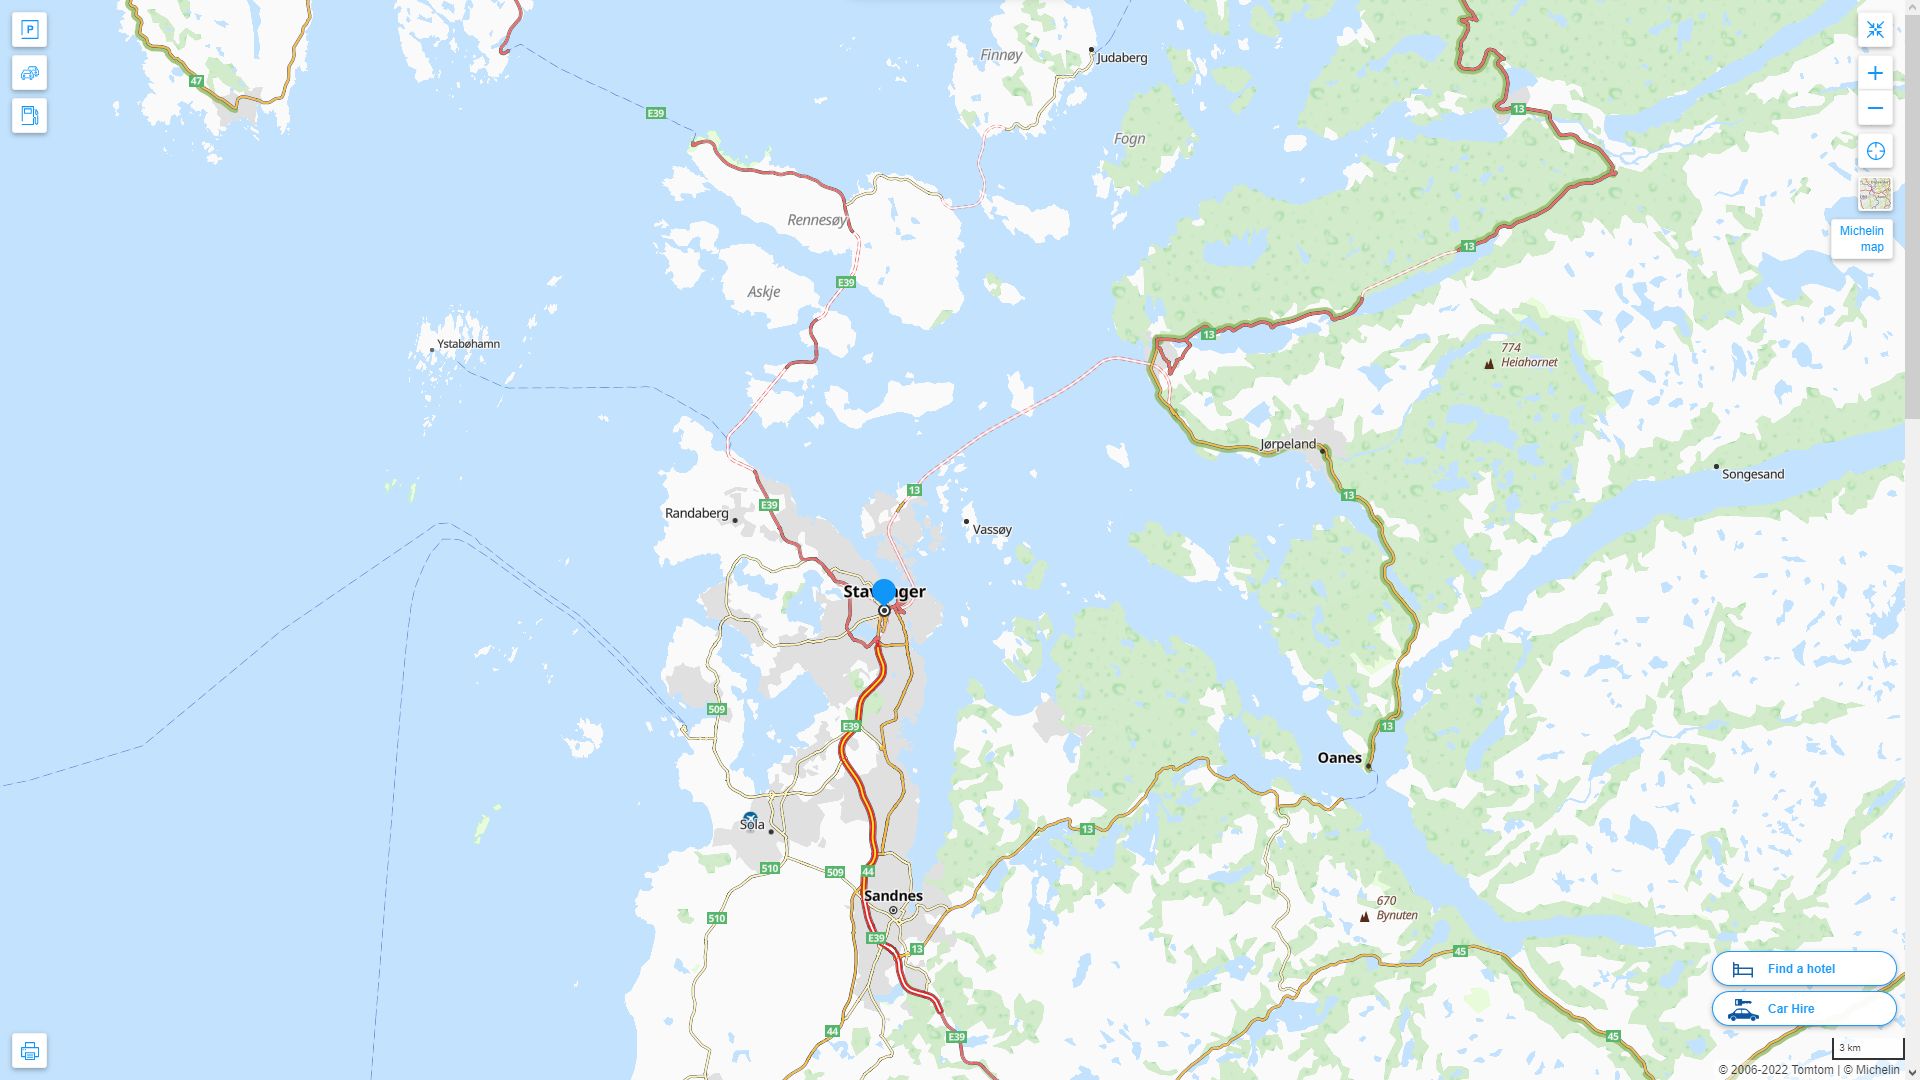 Stavanger Highway and Road Map